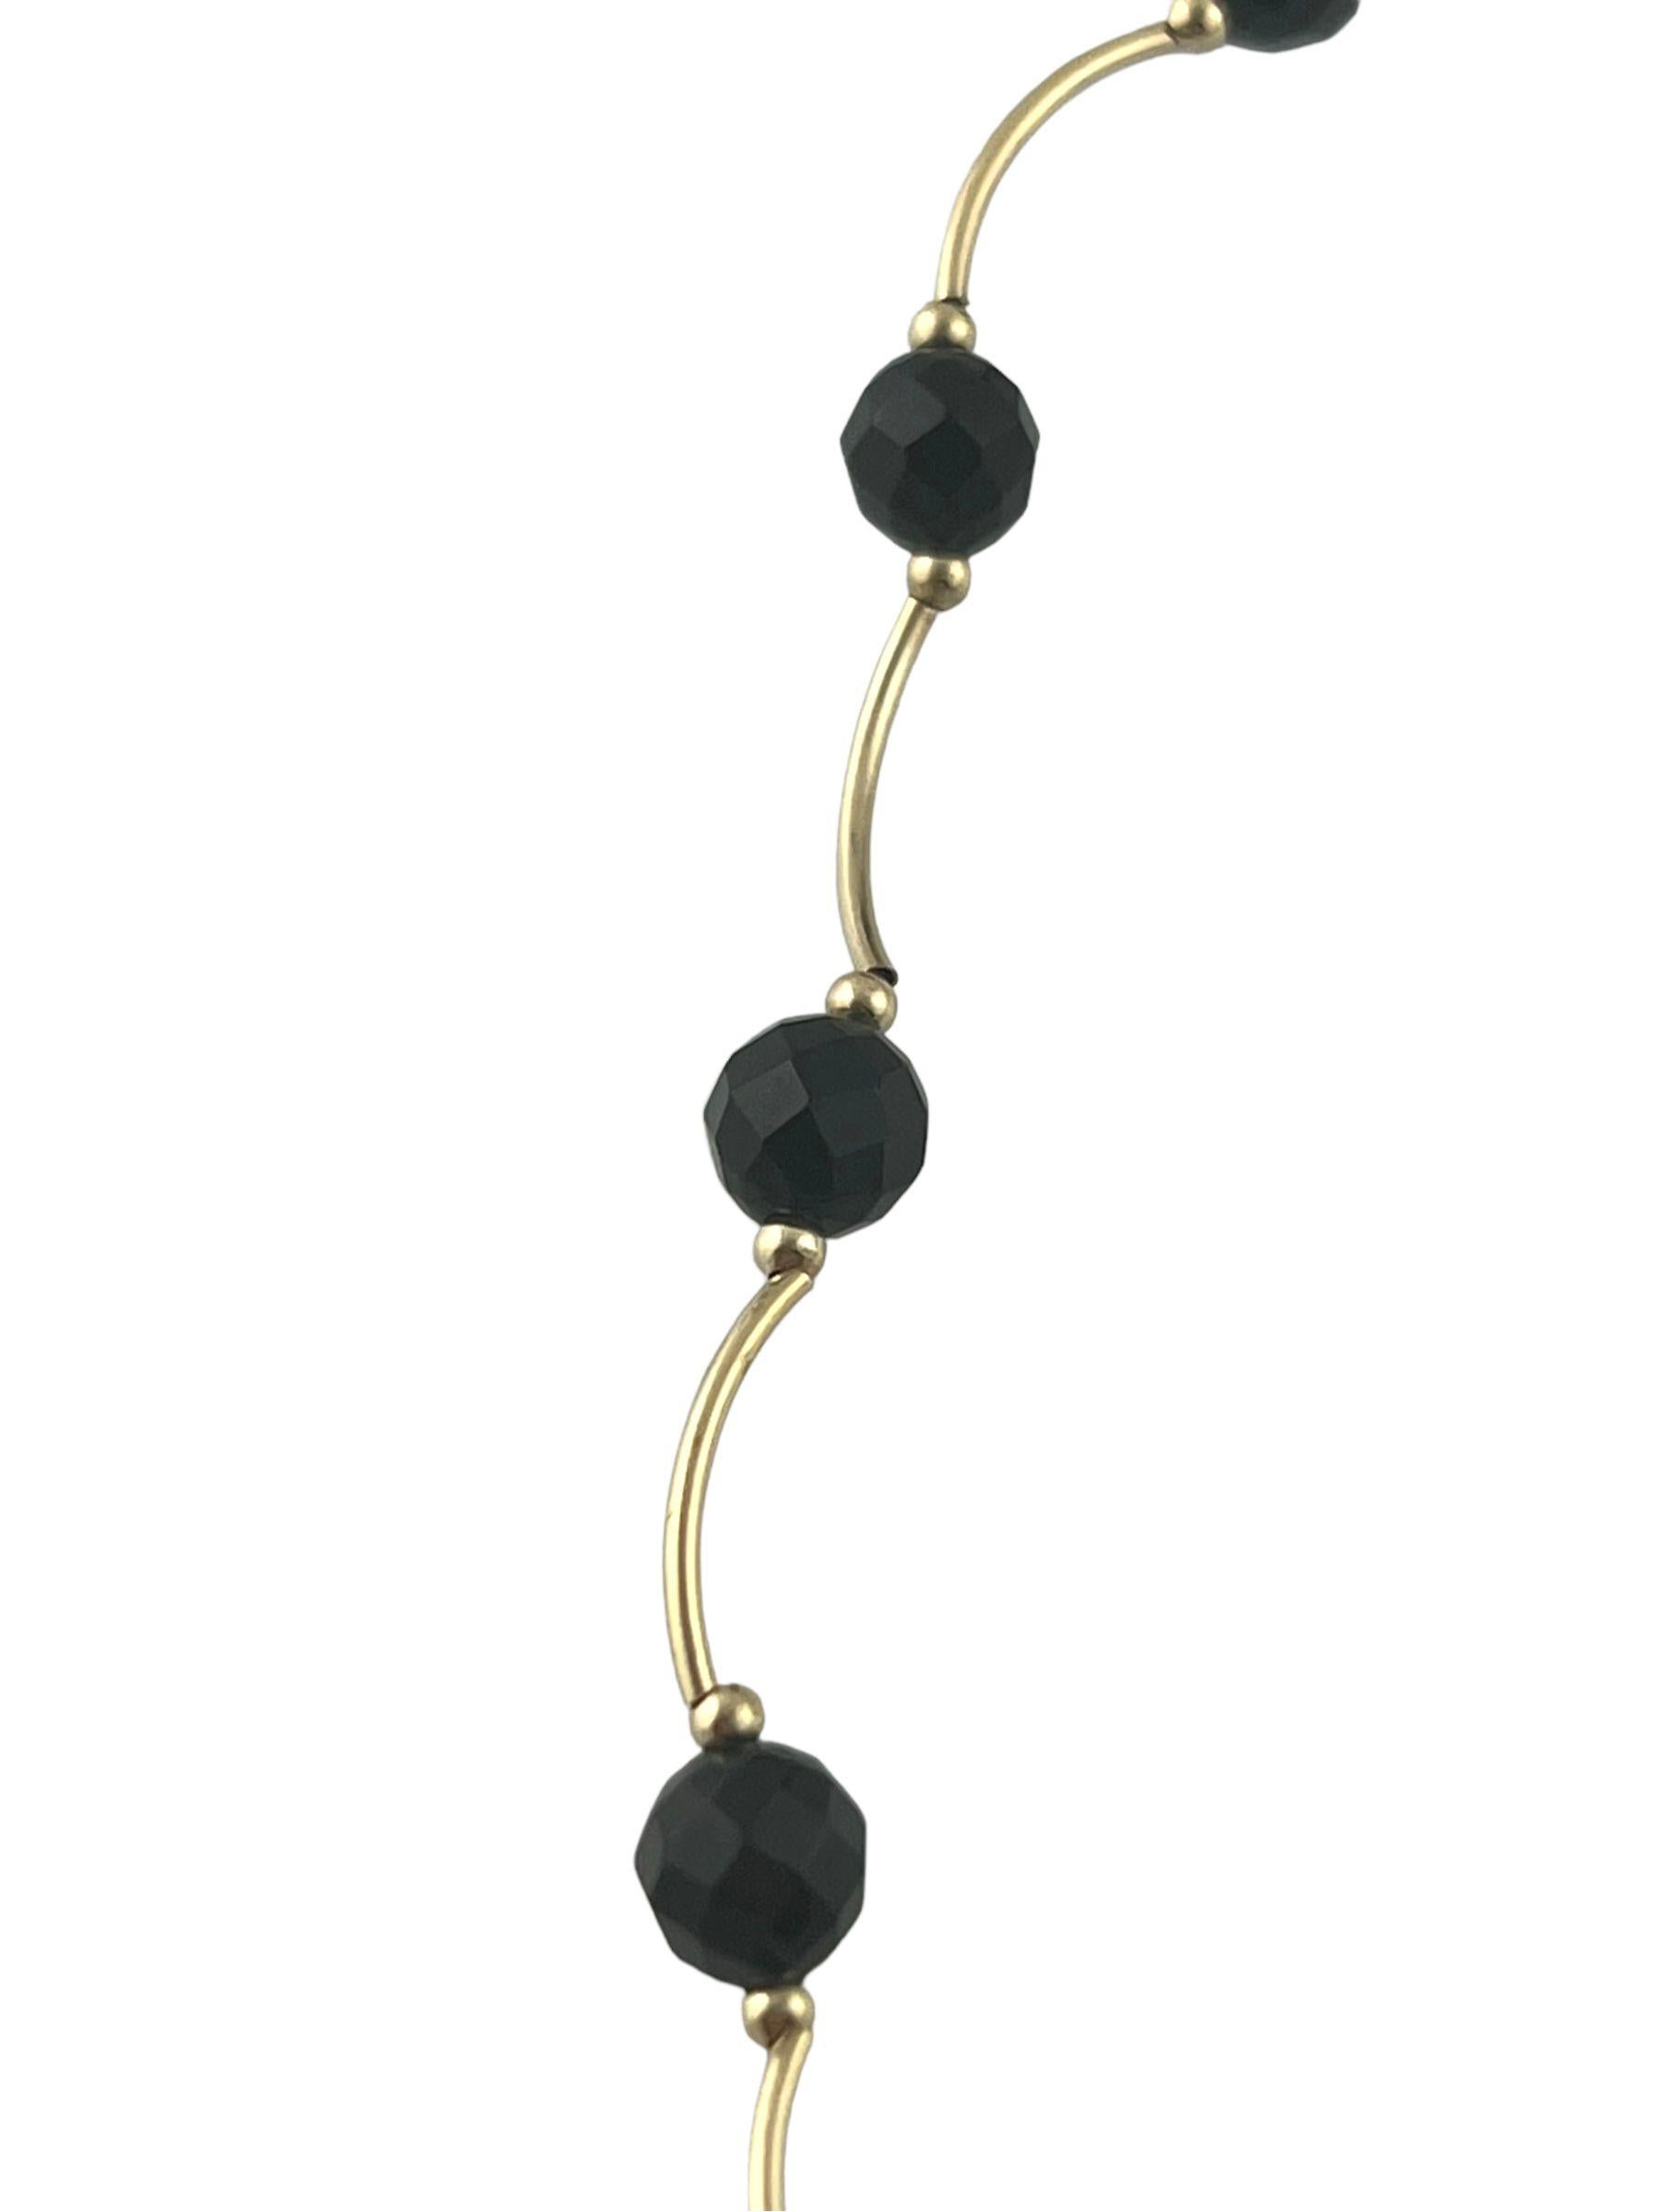 Beautiful 14k yellow gold black onyx bead necklace features 18 onyx beads separated by half an inch of curved 14k yellow gold bars.

Length: 15.5